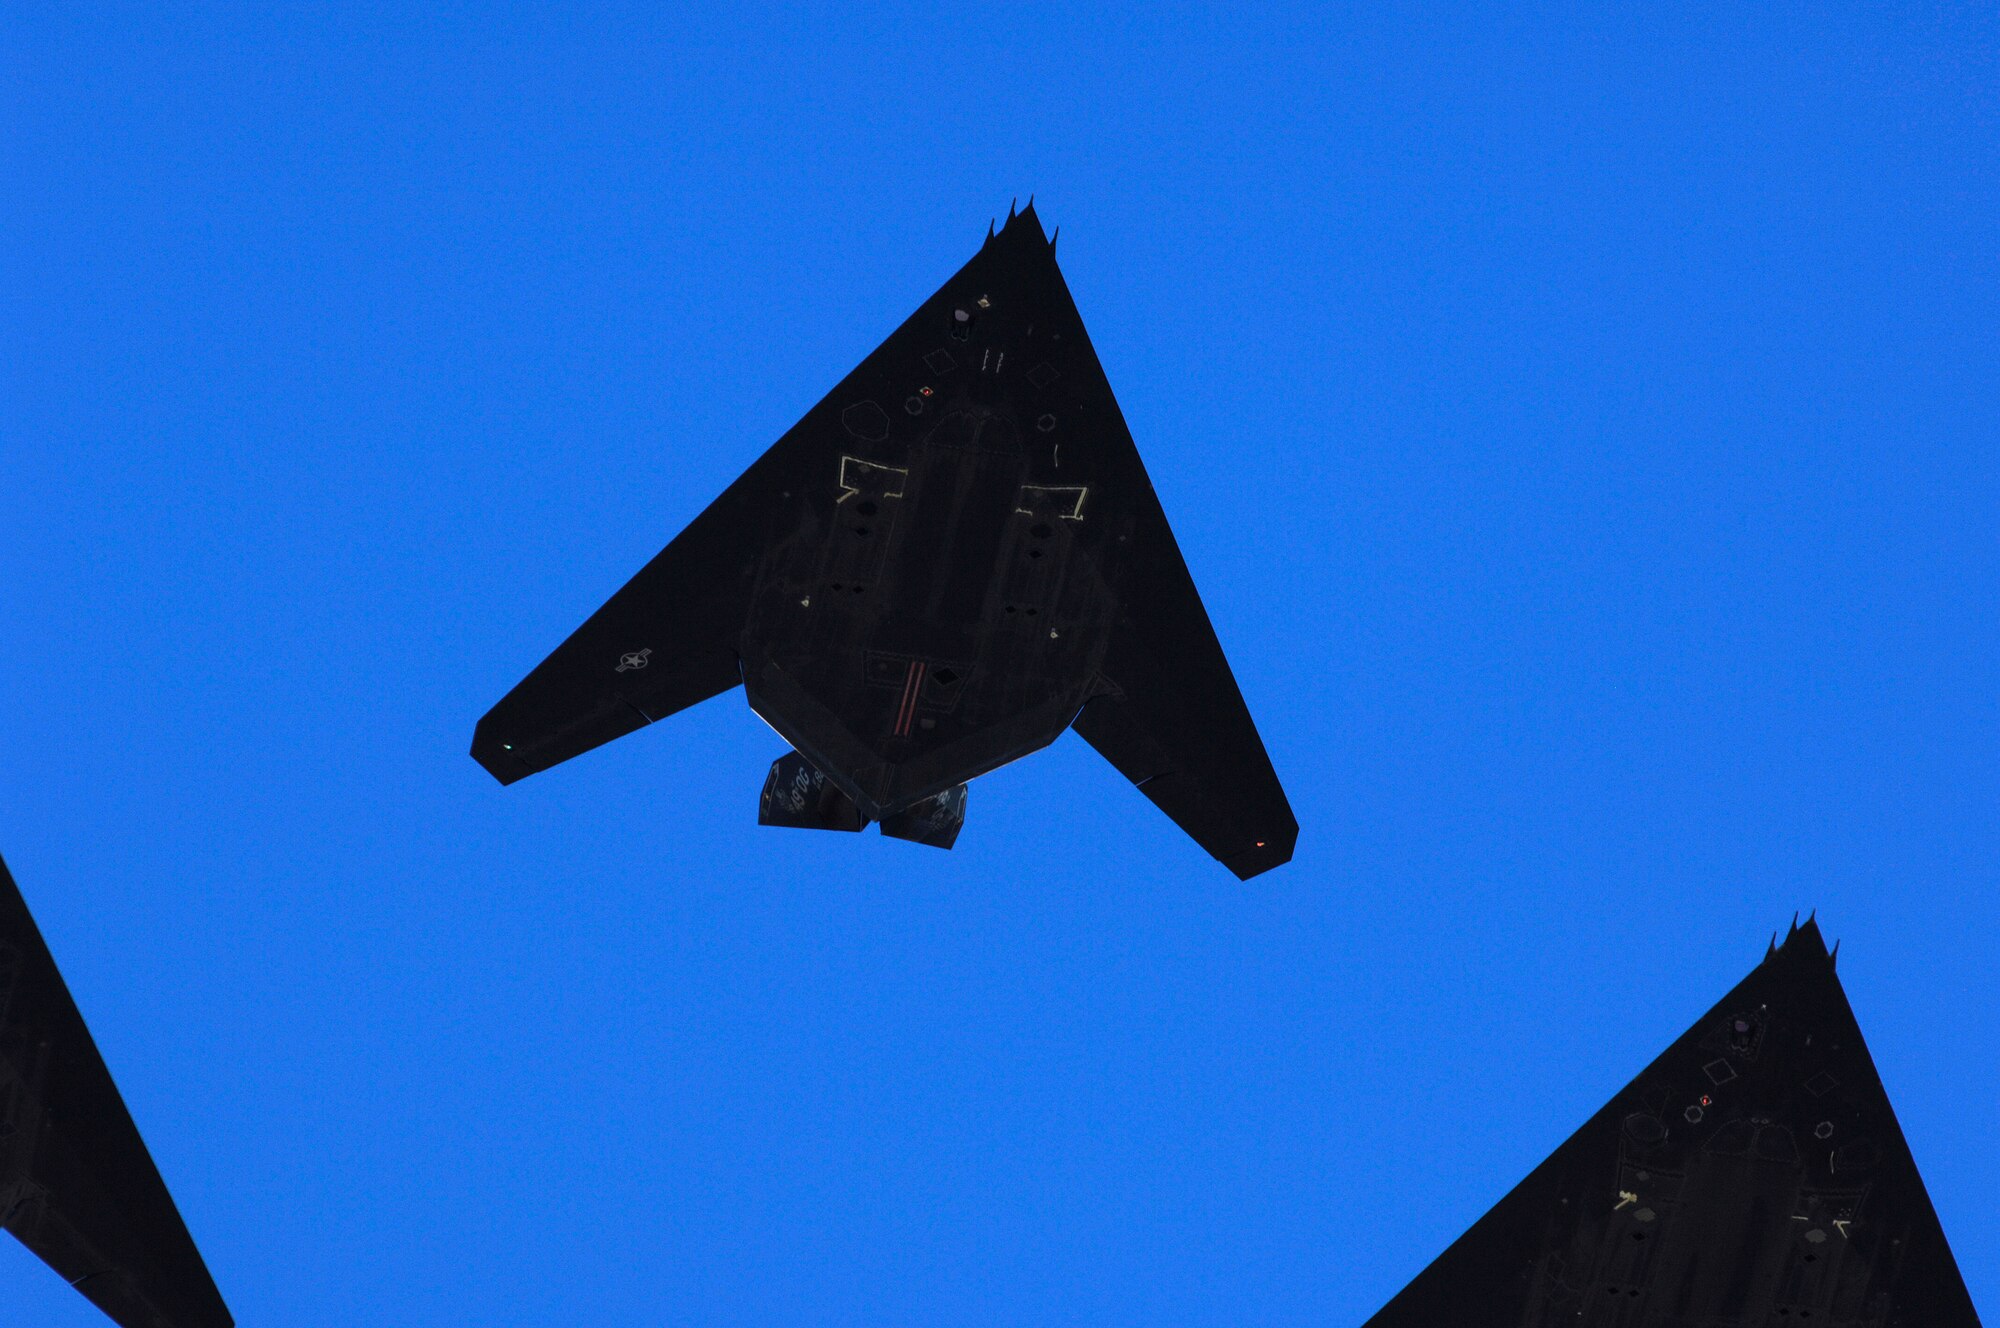 The final four F-117A Nighthawk's fly over Holloman AFB, N.M. during the Sunset Stealth retirement ceremony, 21 April 2008. The F-117A flew under the flag of the 49th Fighter Wing at Holloman Air Force Base, New Mexico from 1992 to its retirement in 2008. (U.S. Air Force Photo by SSgt Jason Colbert)